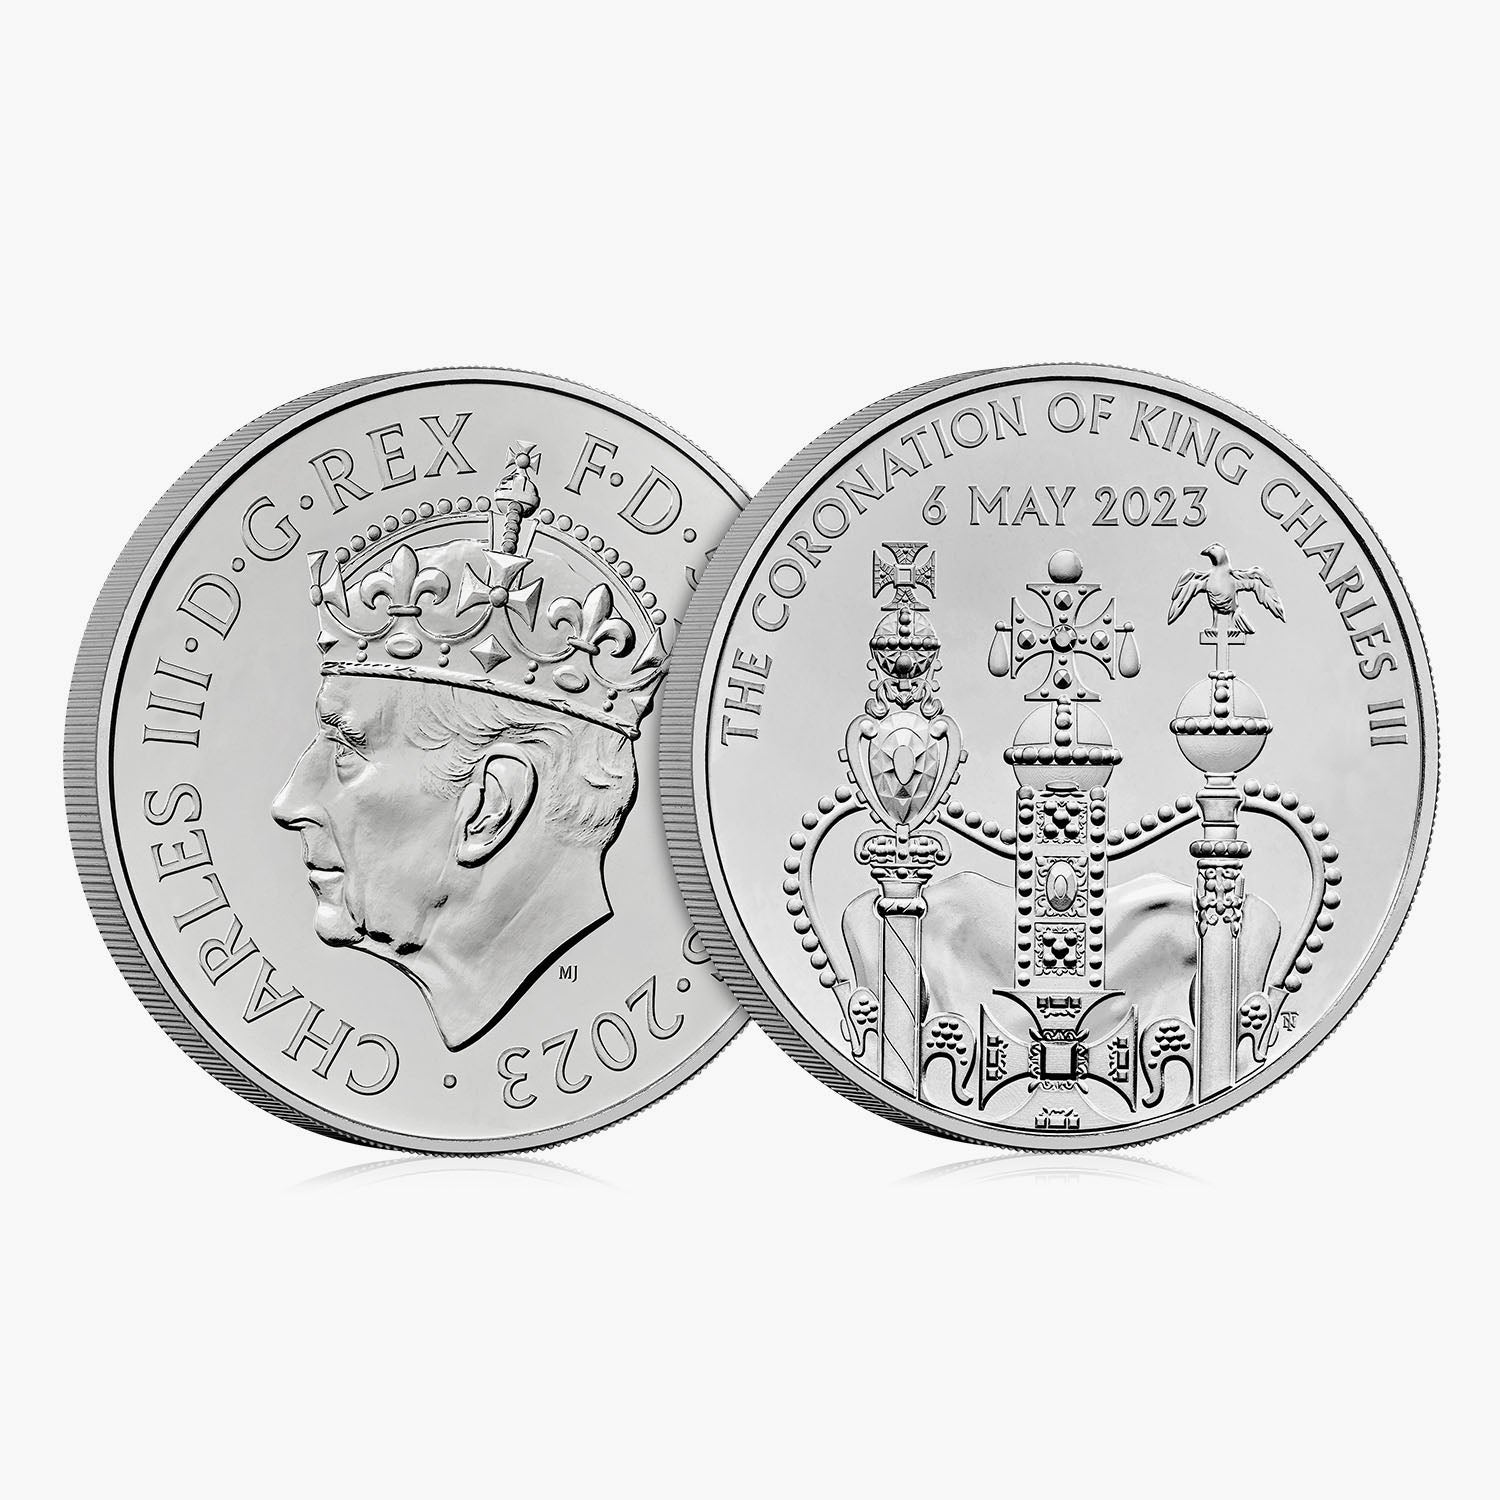 The Coronation of His Majesty King Charles UK £5 Brilliant Uncirculated Coin